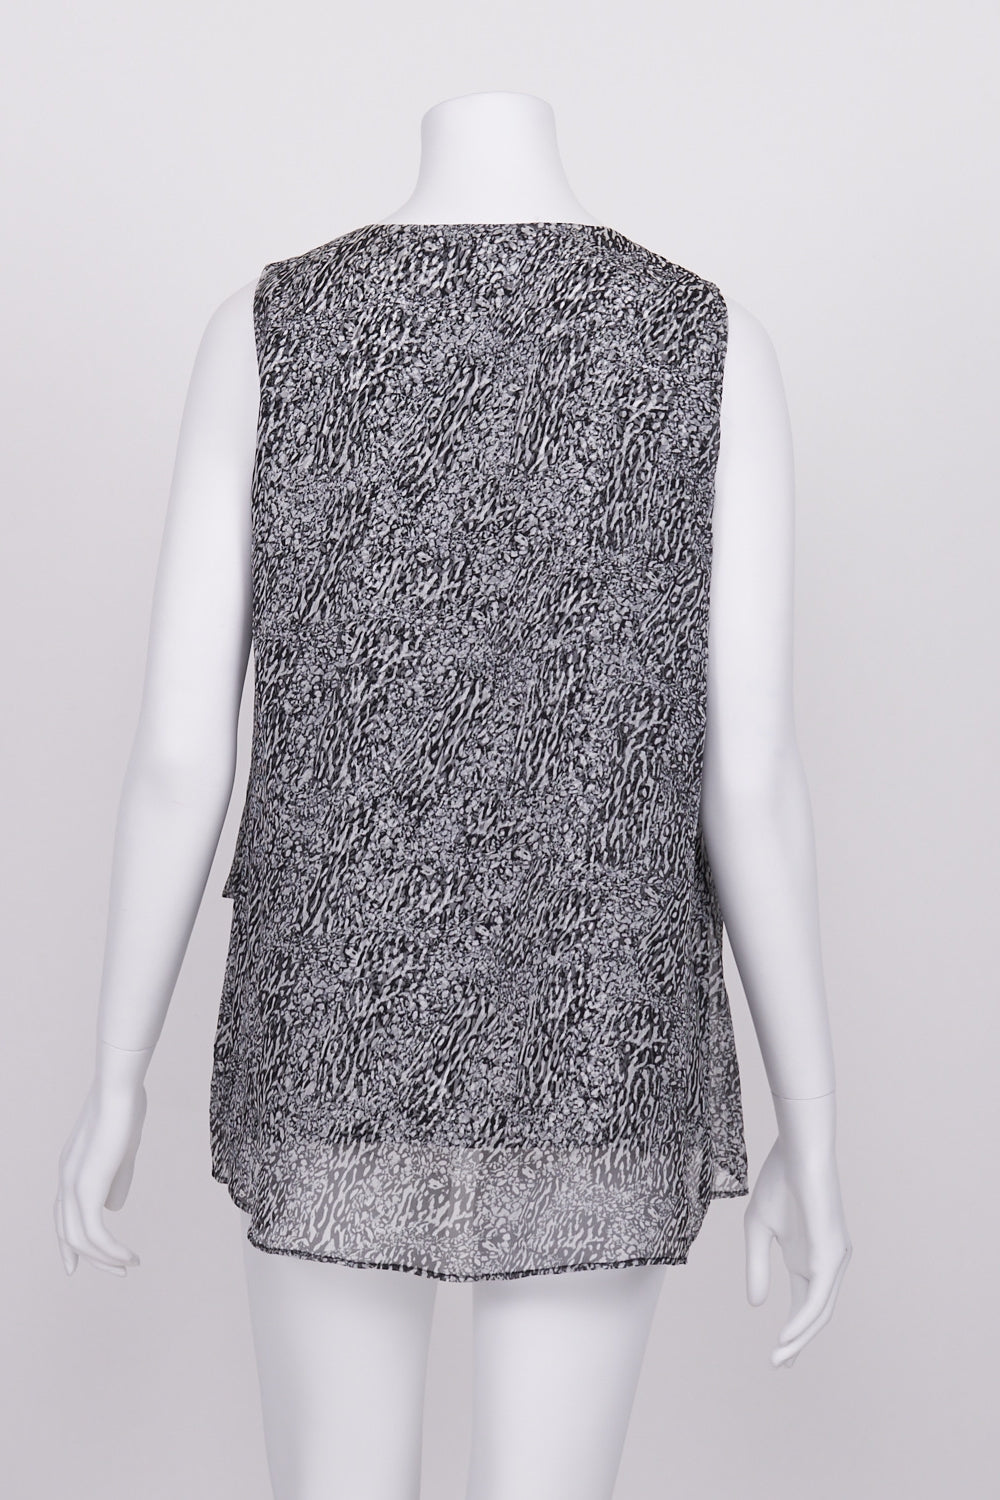 Blue Illusion Grey Patterned Sleeveless Silk Top S